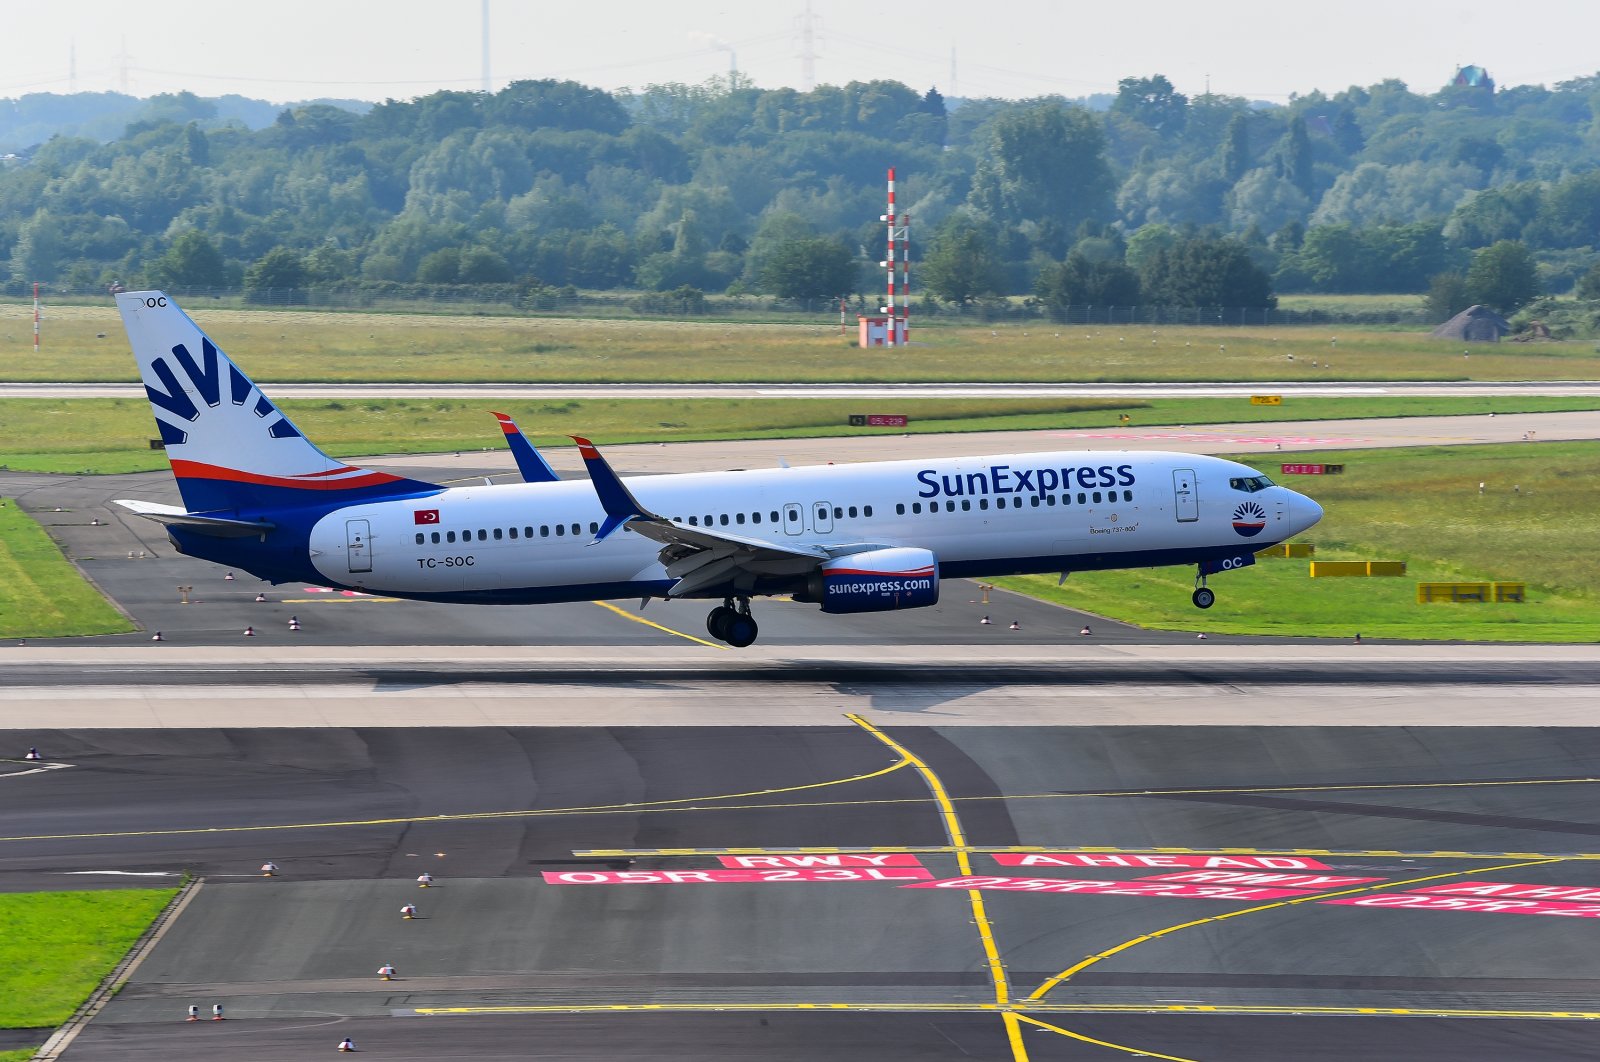 A SunExpress Airlines Boeing 737-800 is seen at the airport in Düsseldorf, Germany, June 3, 2018. (Shutterstock Photo)